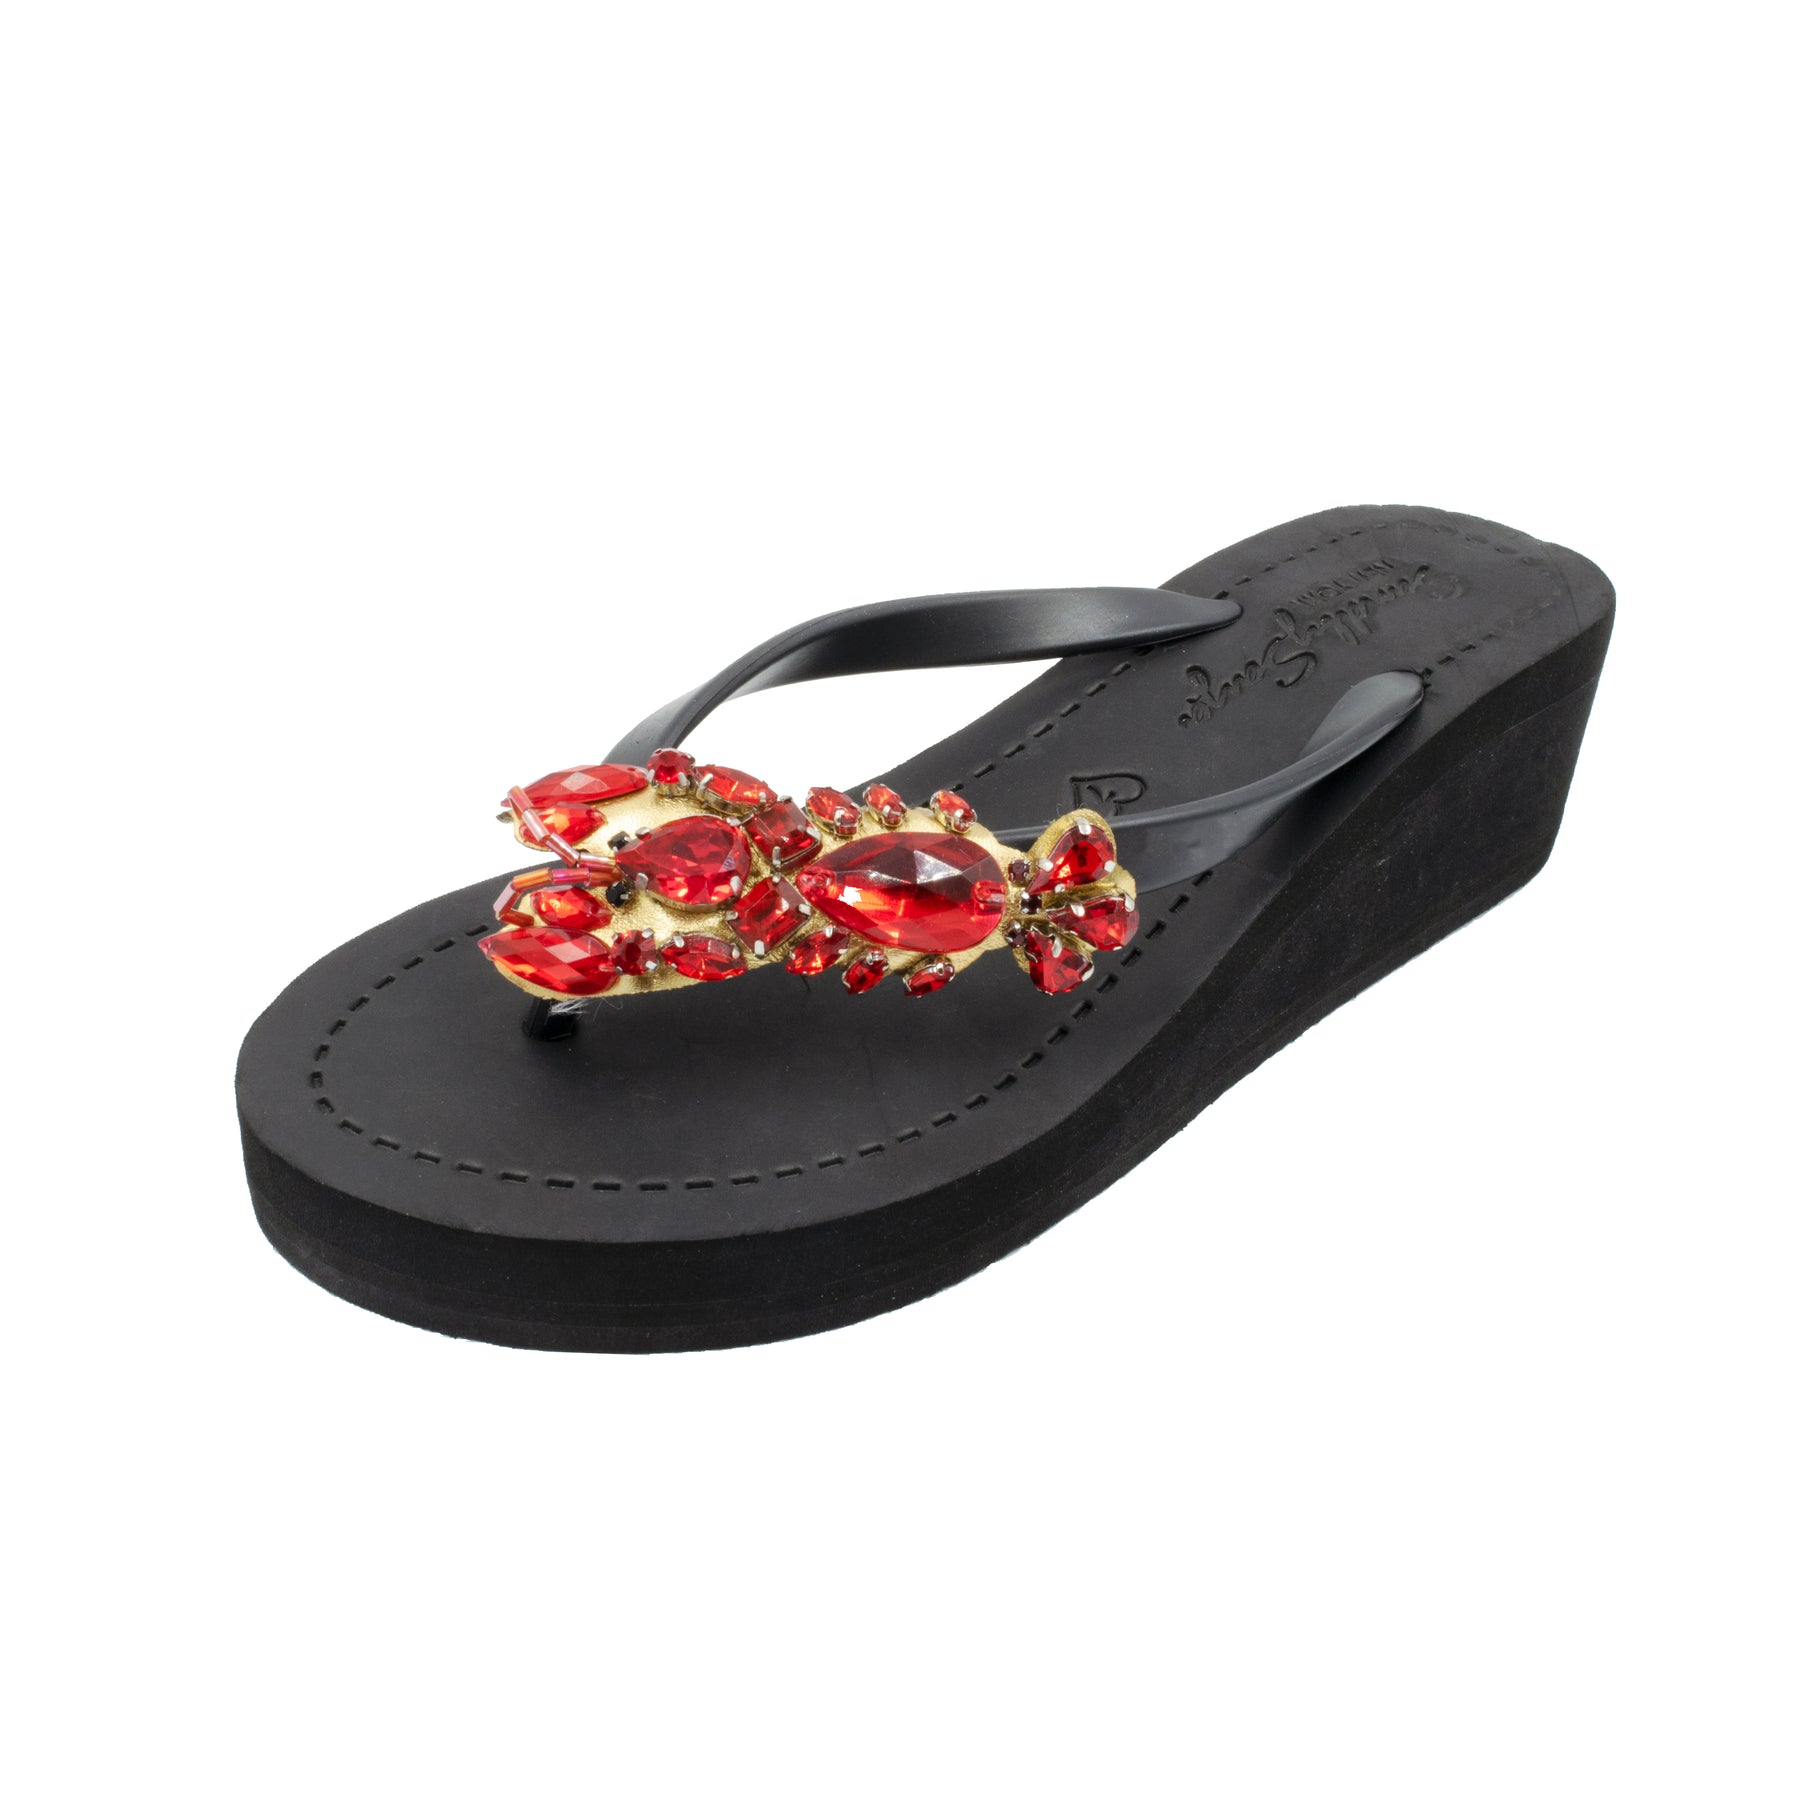 Lobster - Women's Mid Wedge, Red, Lobster